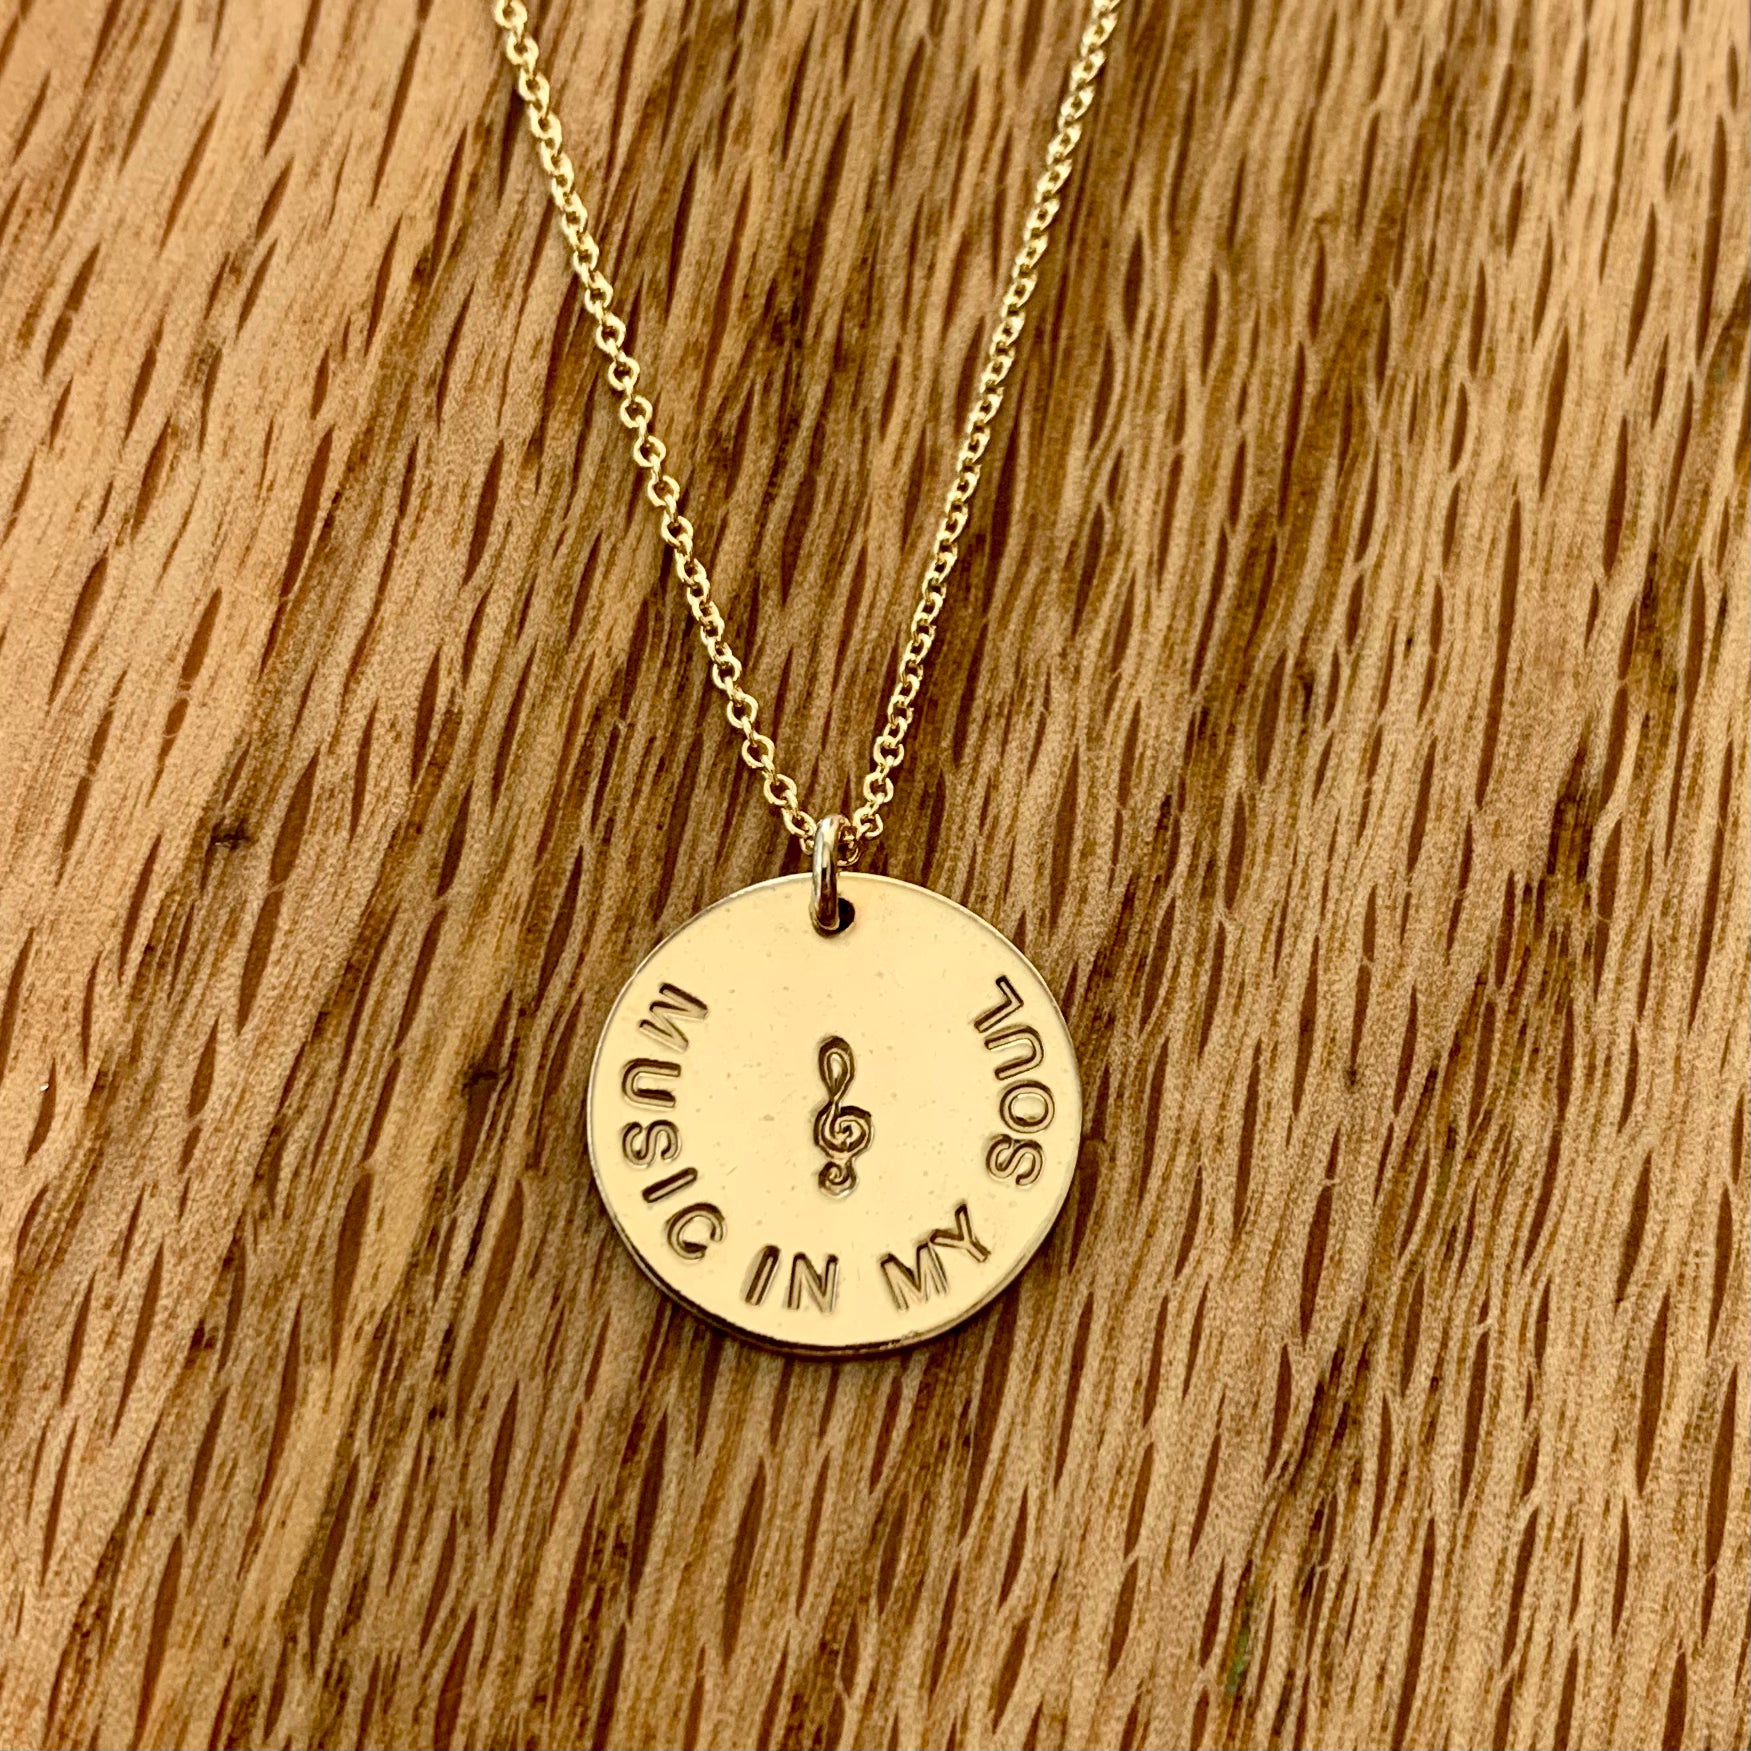 Custom name necklace - hand stamped disc with names, dates, designs, personalized - disc with chain